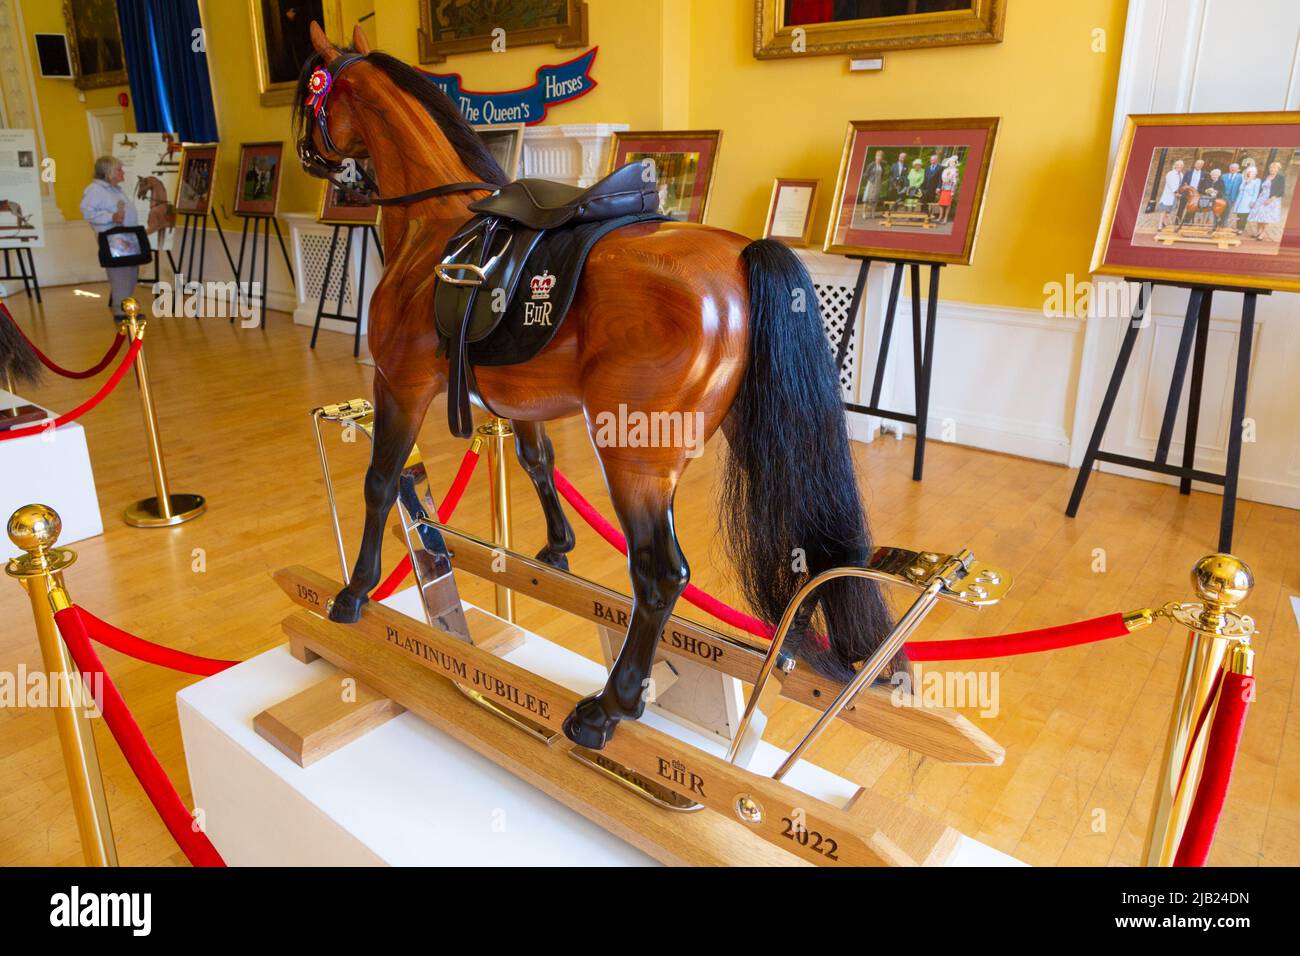 Ashford, Kent, UK. 2nd Jun, 2022. All the Queen's horses is a unique exhibition of rocking horses presented to Her Majesty the Queen by the Stevenson brothers, master rocking horse makers. This exhibition runs during the course of the Platinum Jubilee at the Tenterden town hall on the high street. Photo Credit: Paul Lawrenson/Alamy Live News Stock Photo